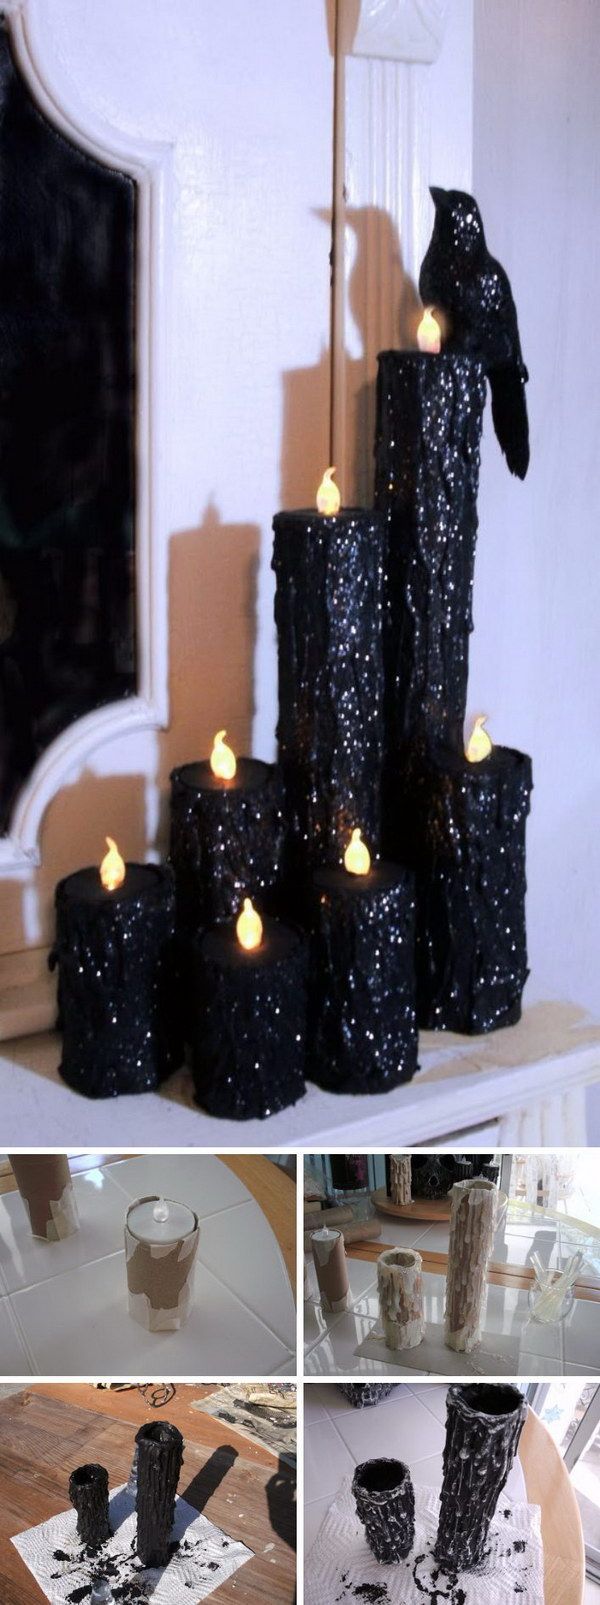 DIY Halloween Creepy Candles. Paper towel rolls, hot glue, battery tea lights, paint, glitter… I can see this tailored for